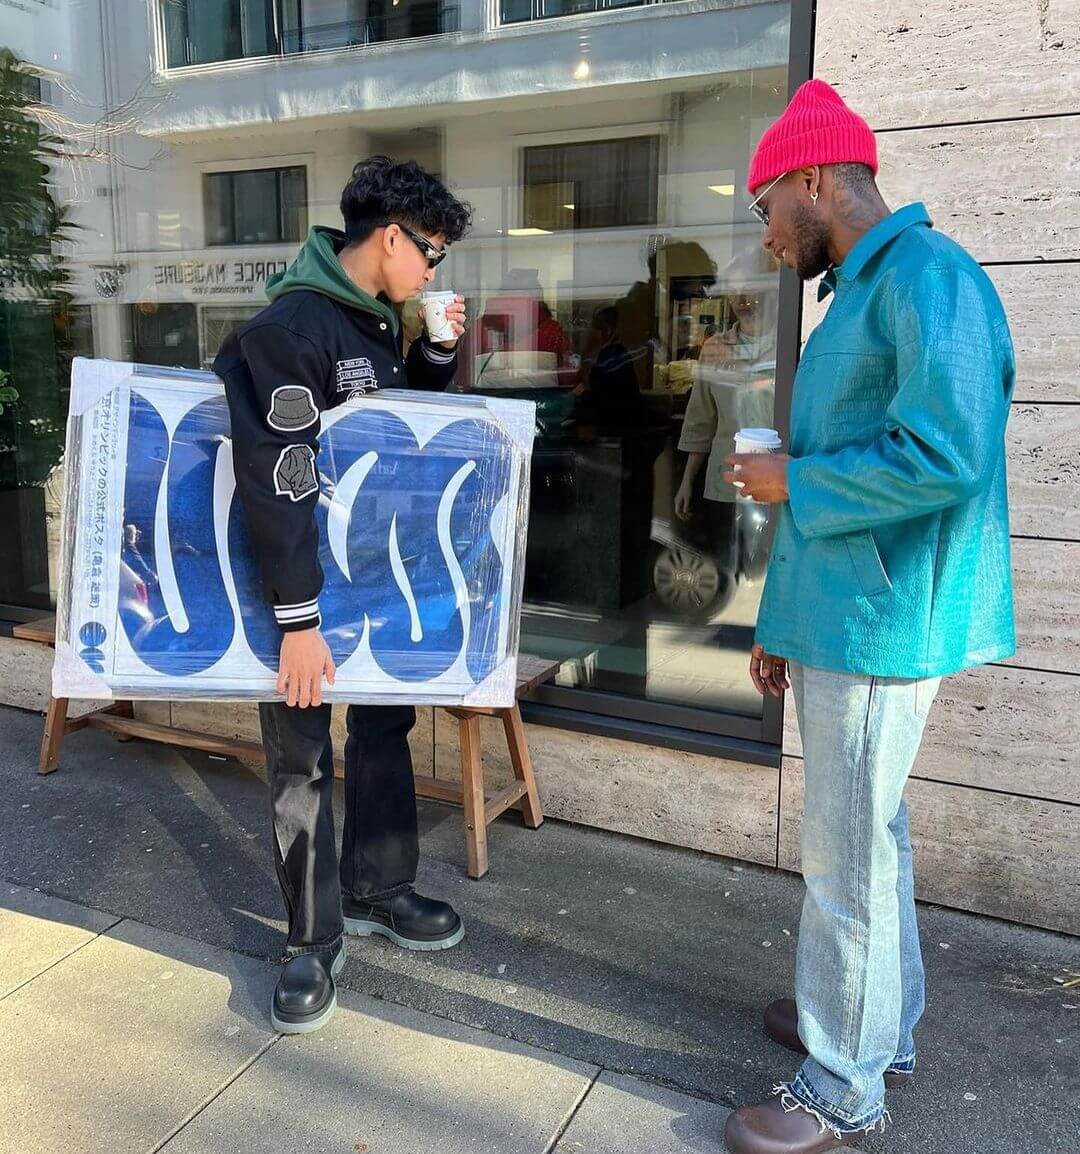 2 men standing on the pavement drinking coffee with one holding a large framed artwork under his arm